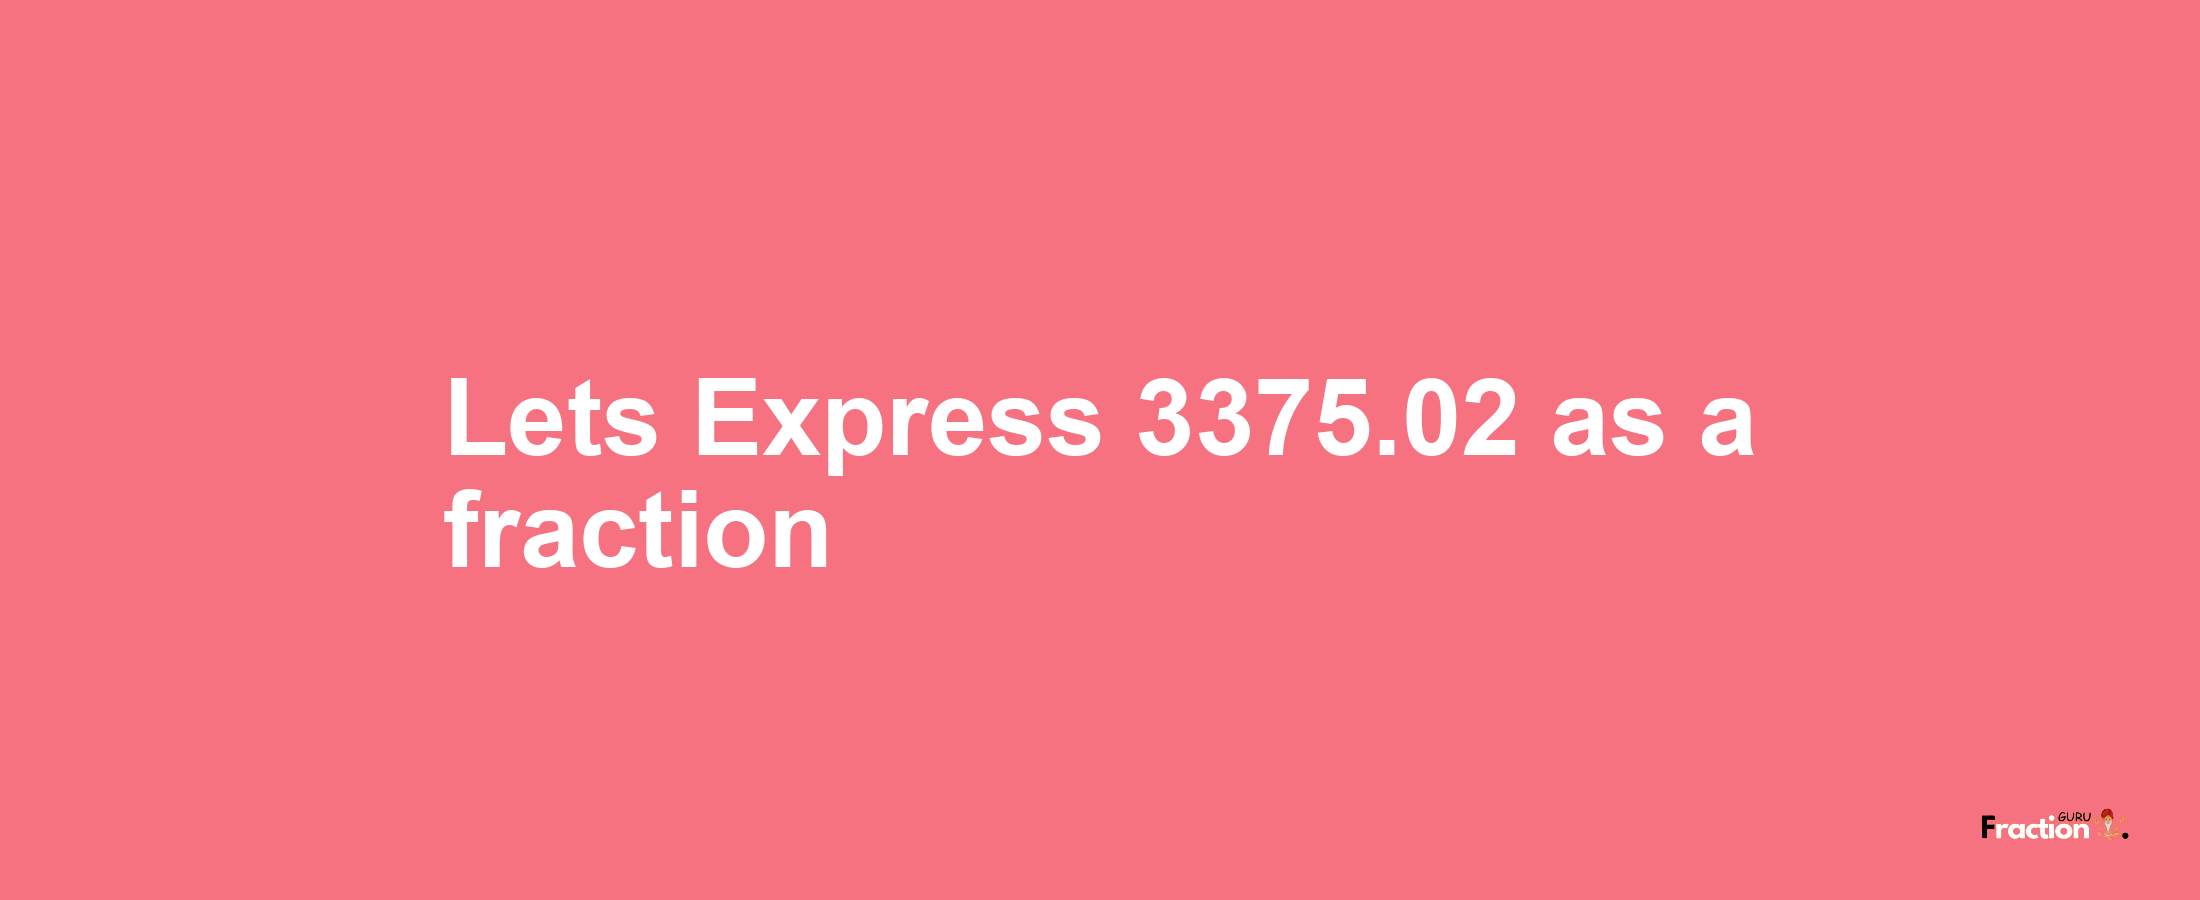 Lets Express 3375.02 as afraction